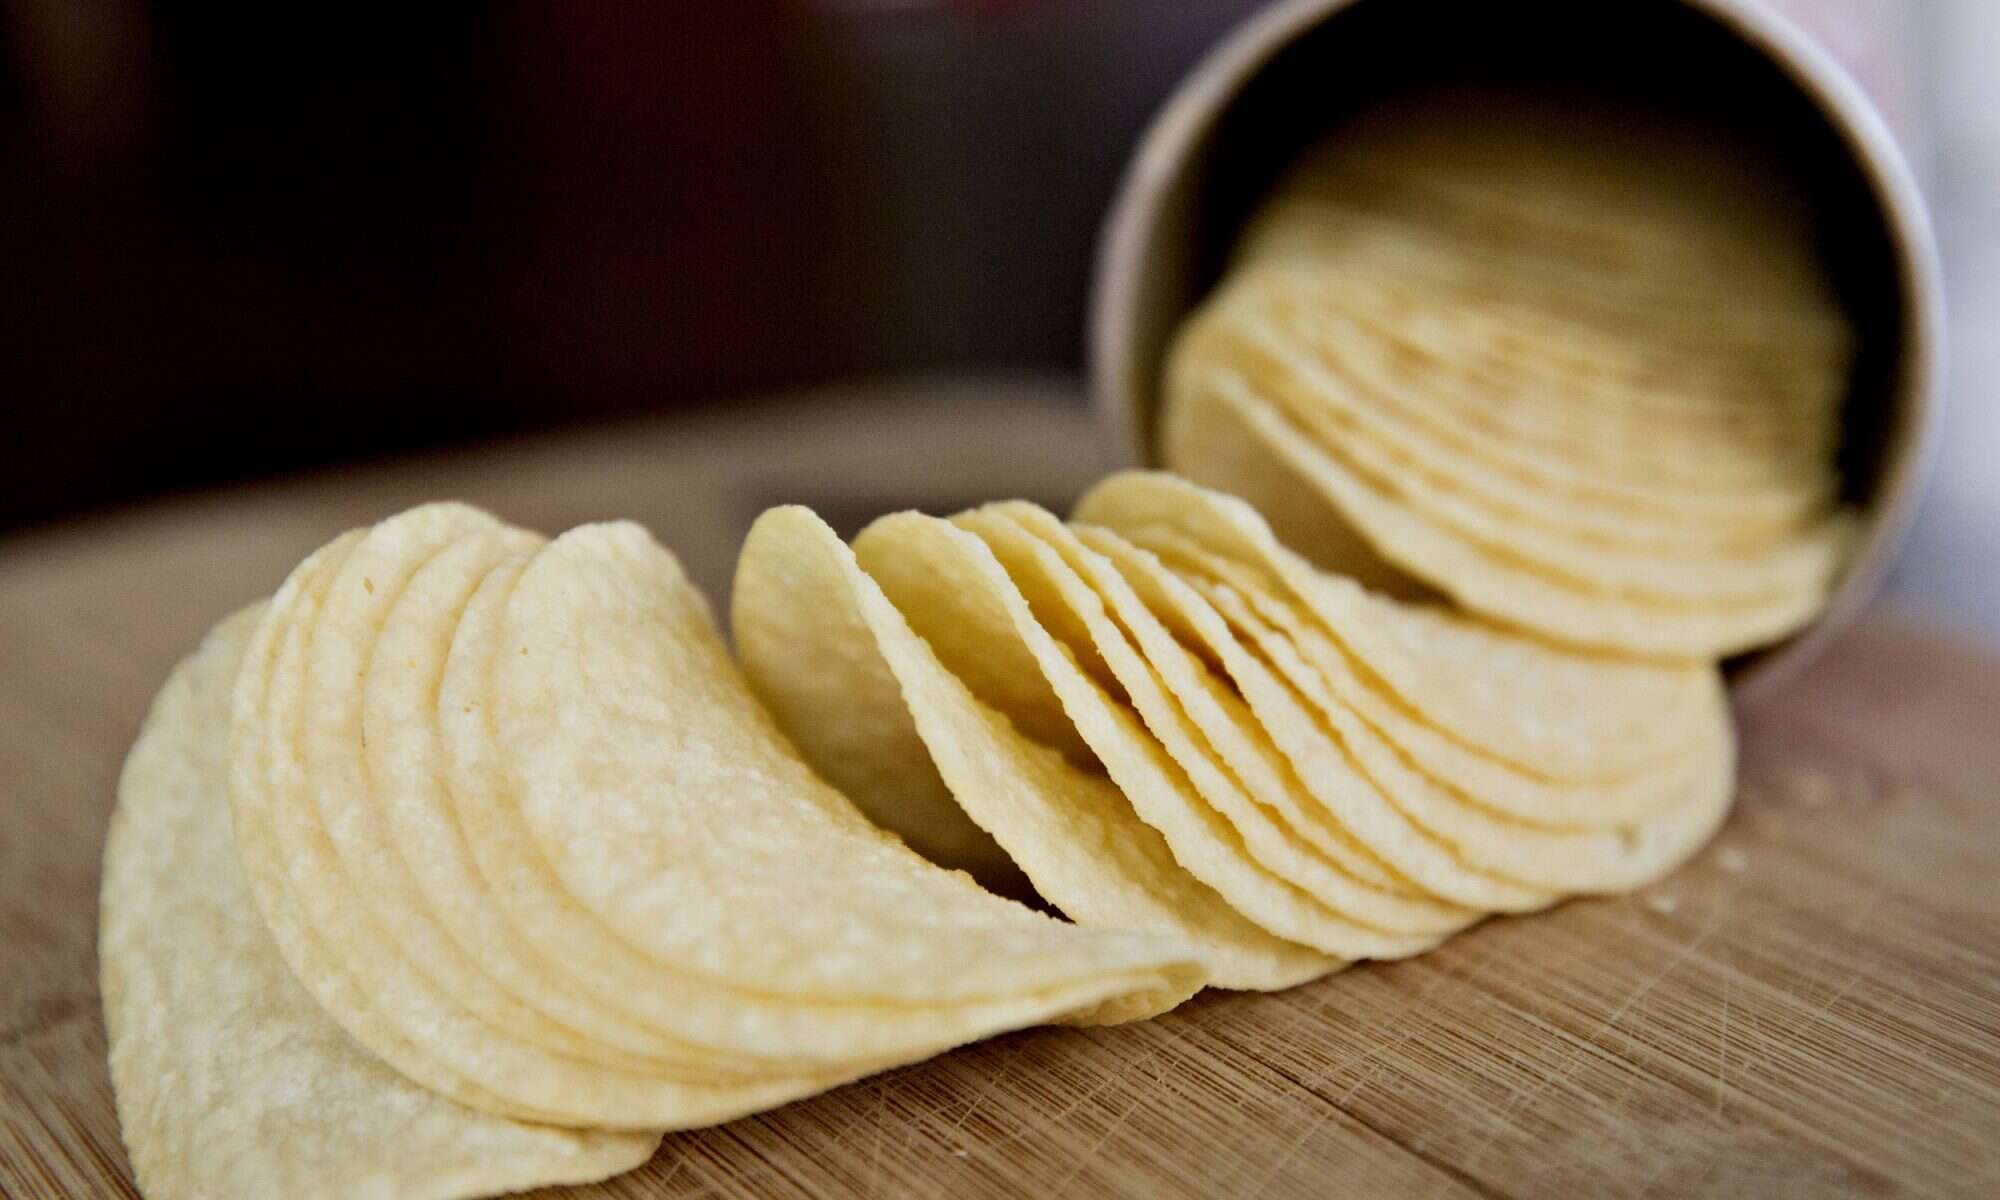 What Are Pringles Made Of?